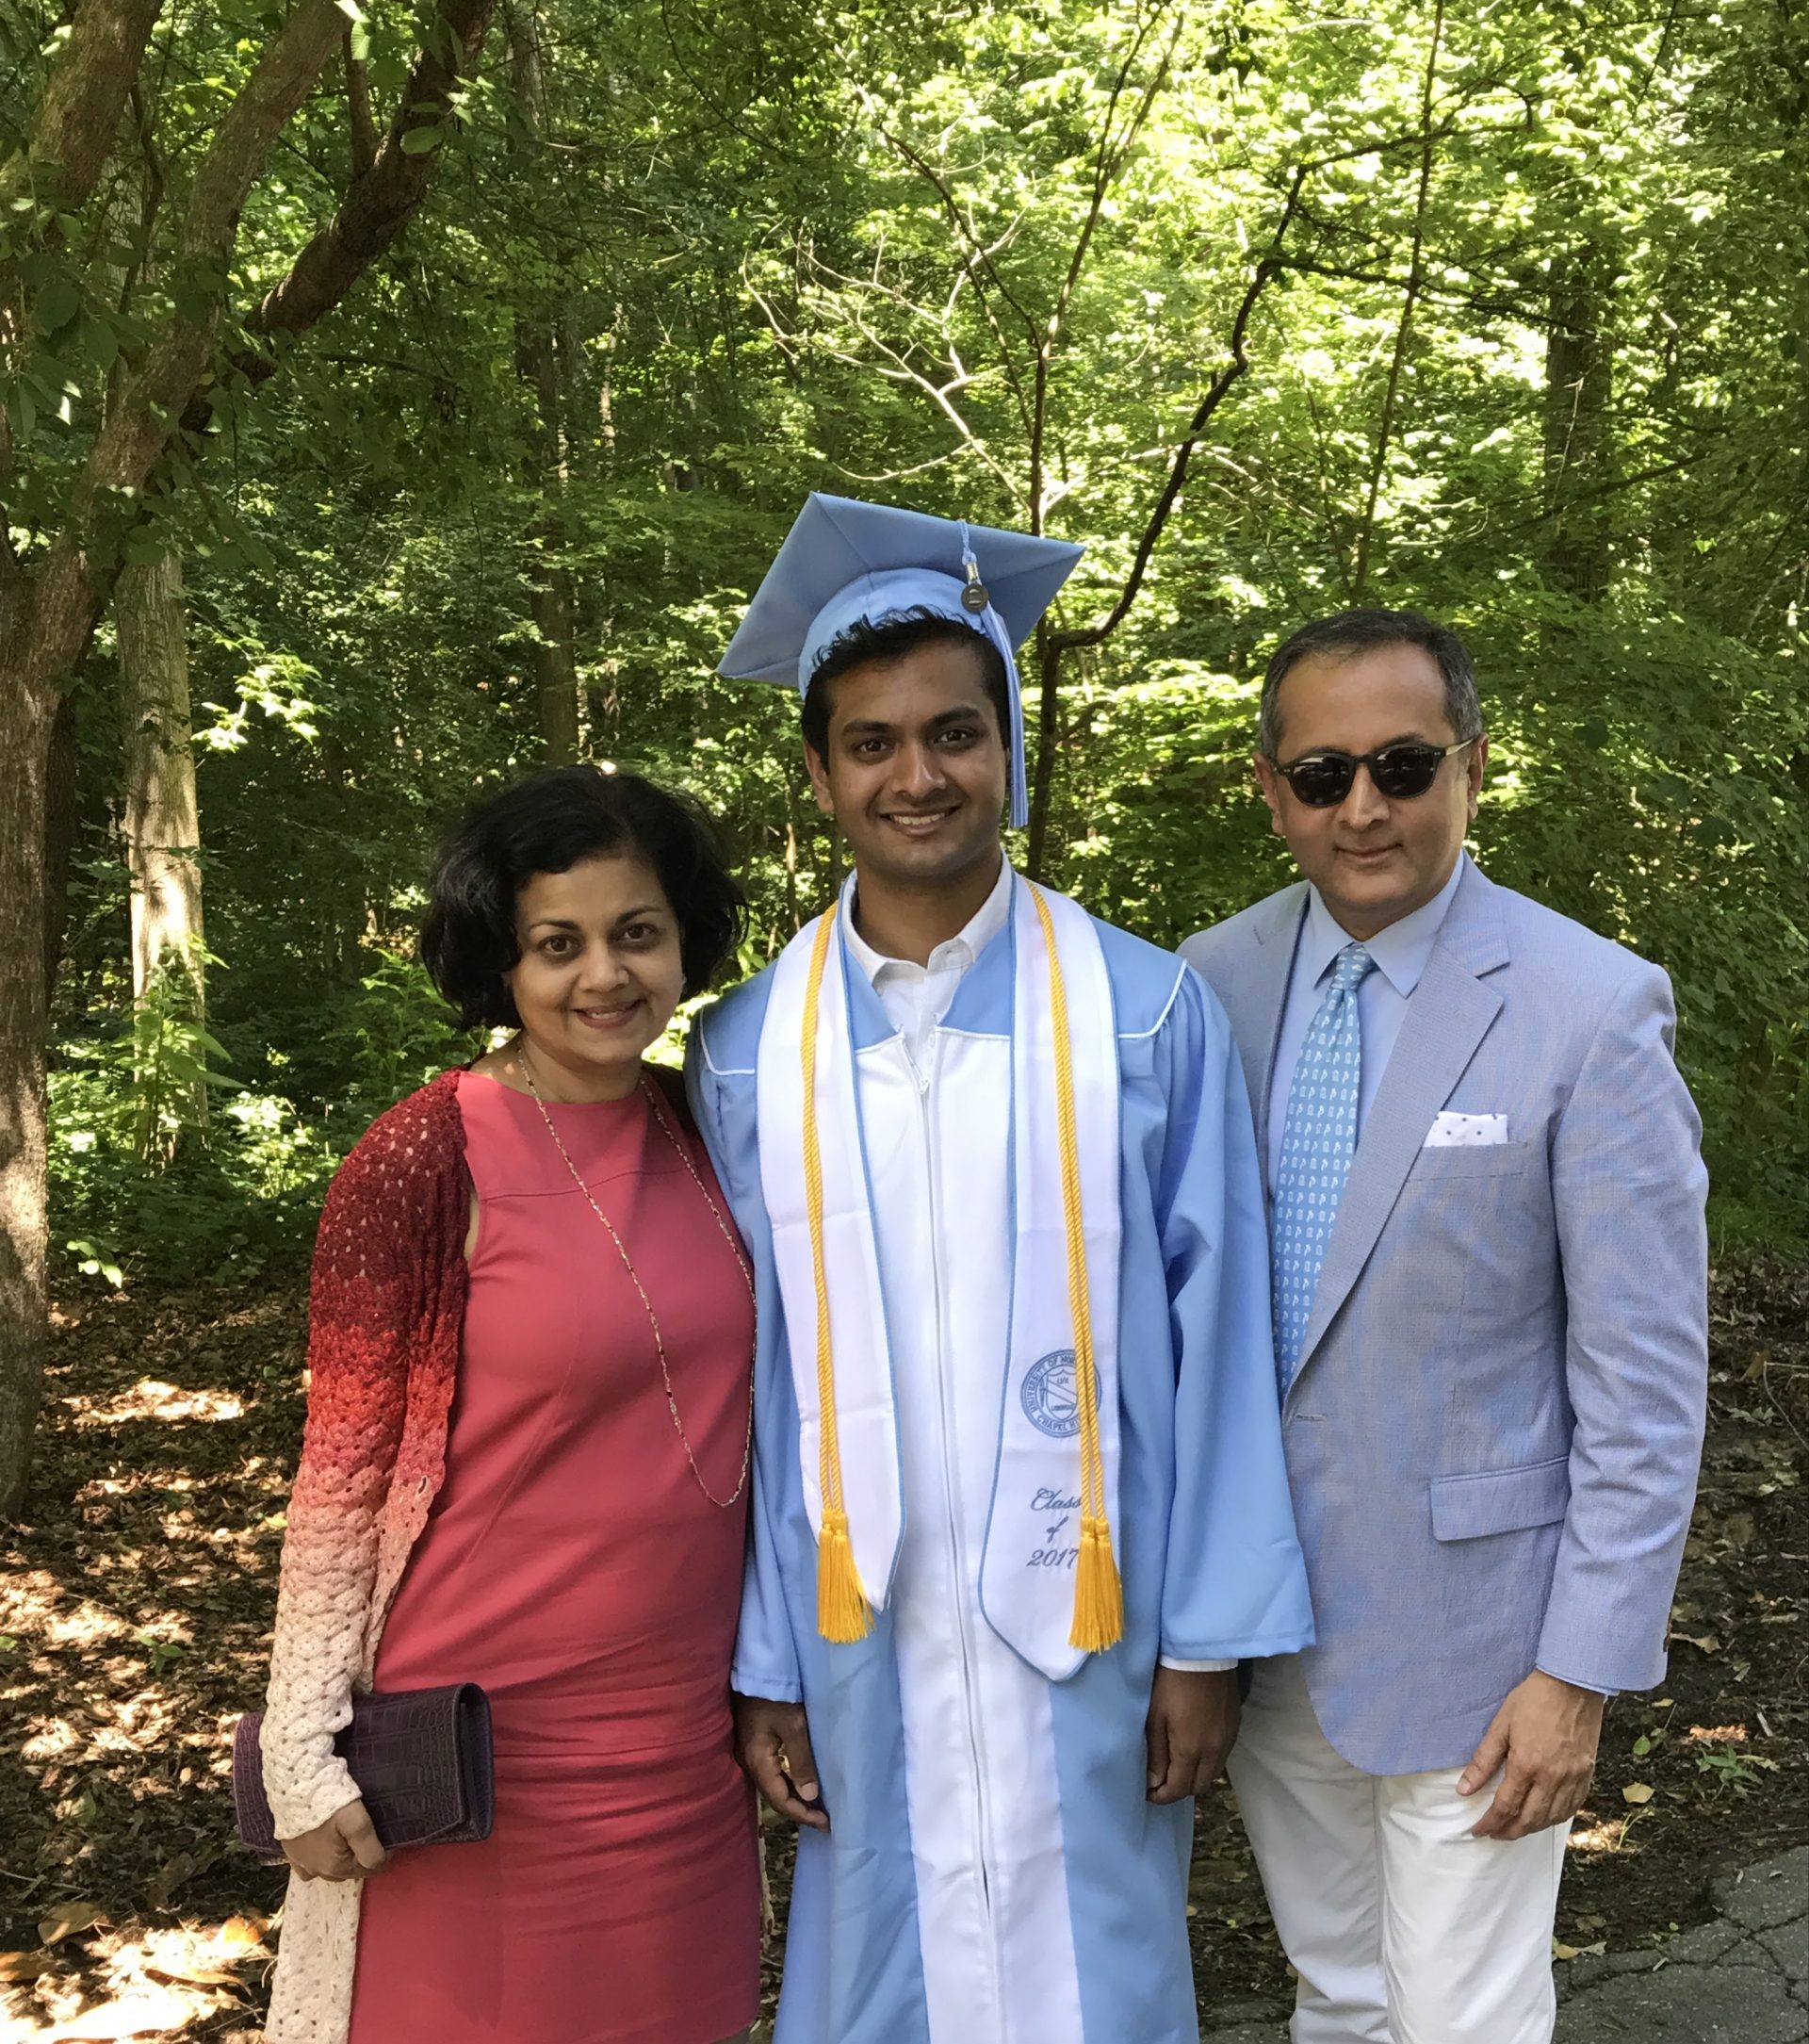 Raj and Mary Rajkumar with their son who is wearing a graduation cap and gown.